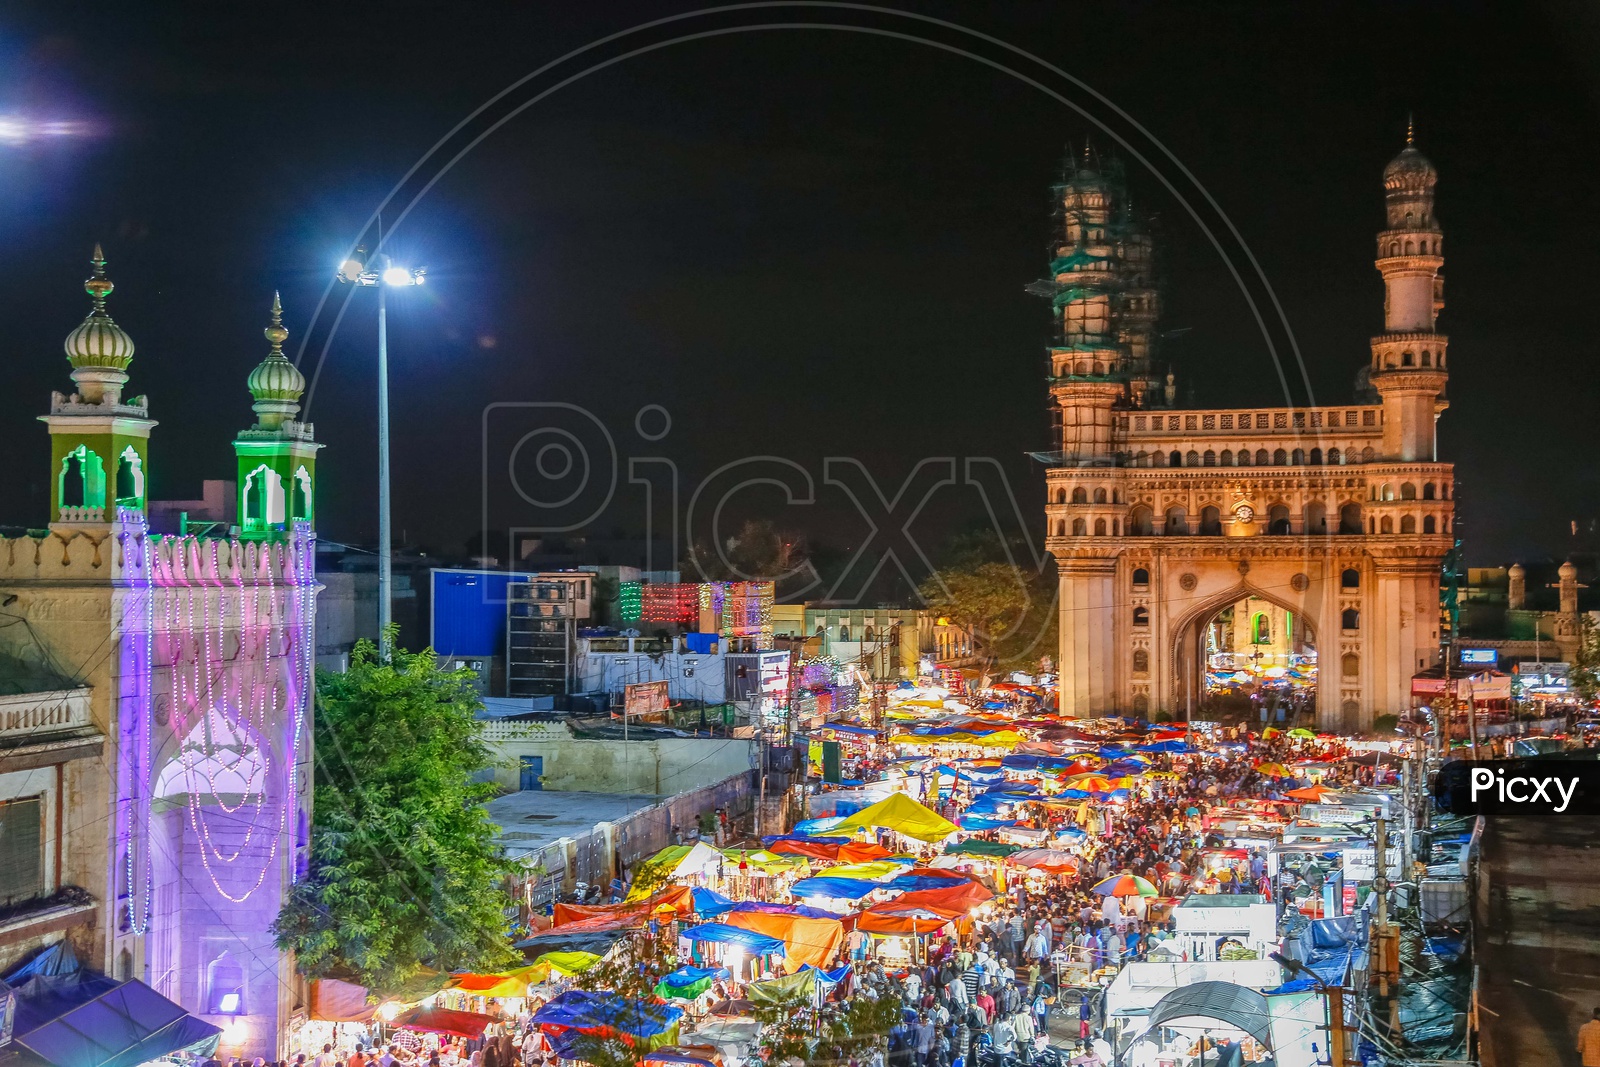 View of Charminar during the night alongside the crowd in street market